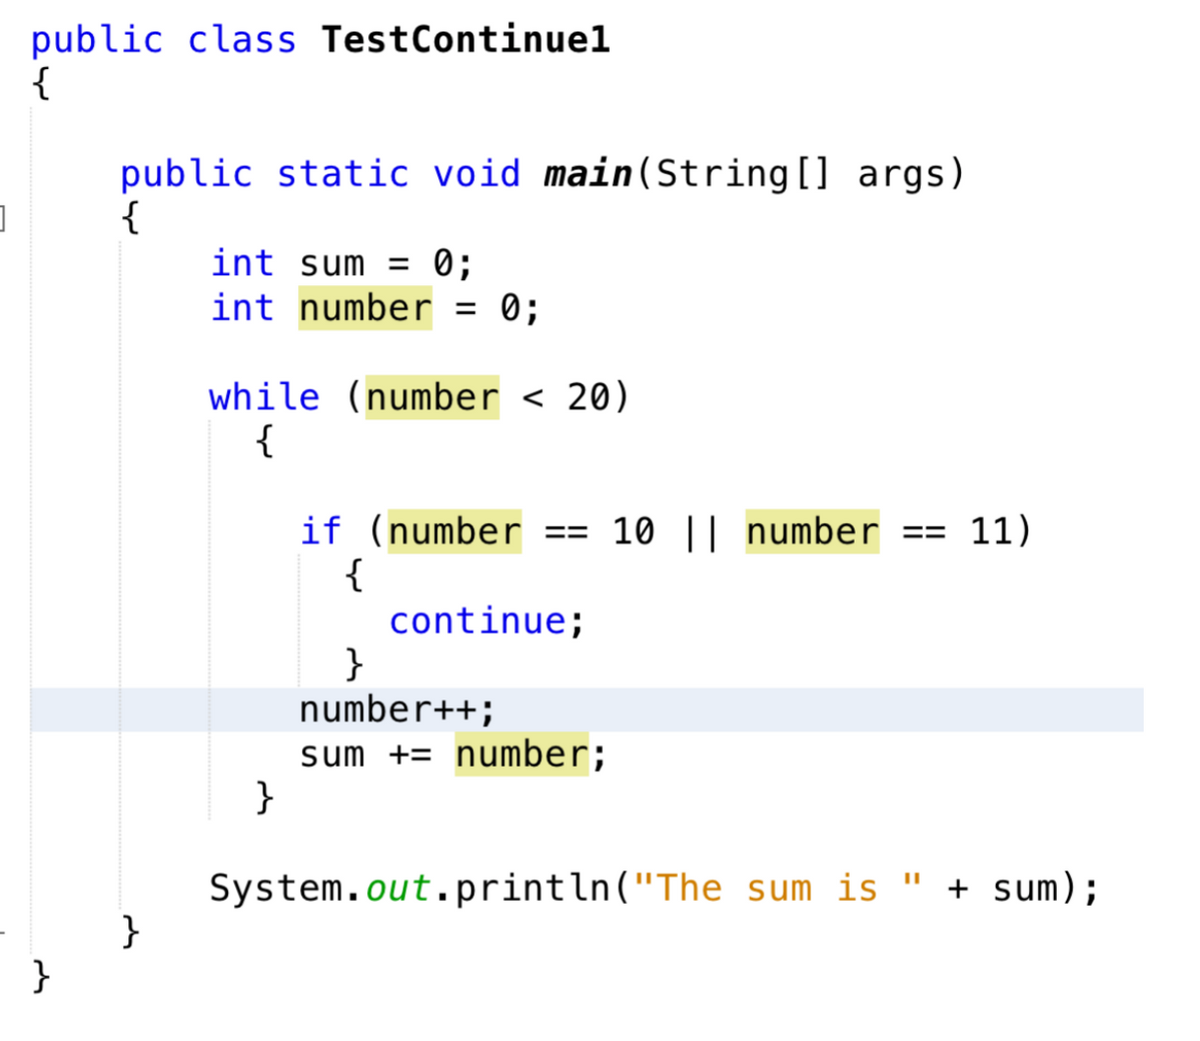 ]
public class TestContinuel
{
}
public static void main(String[] args)
{
}
int sum = 0;
int number = 0;
while (number <20)
{
}
if (number == 10 || number == 11)
{
continue;
}
number++;
sum += number;
System.out.println("The sum is "
+ sum);